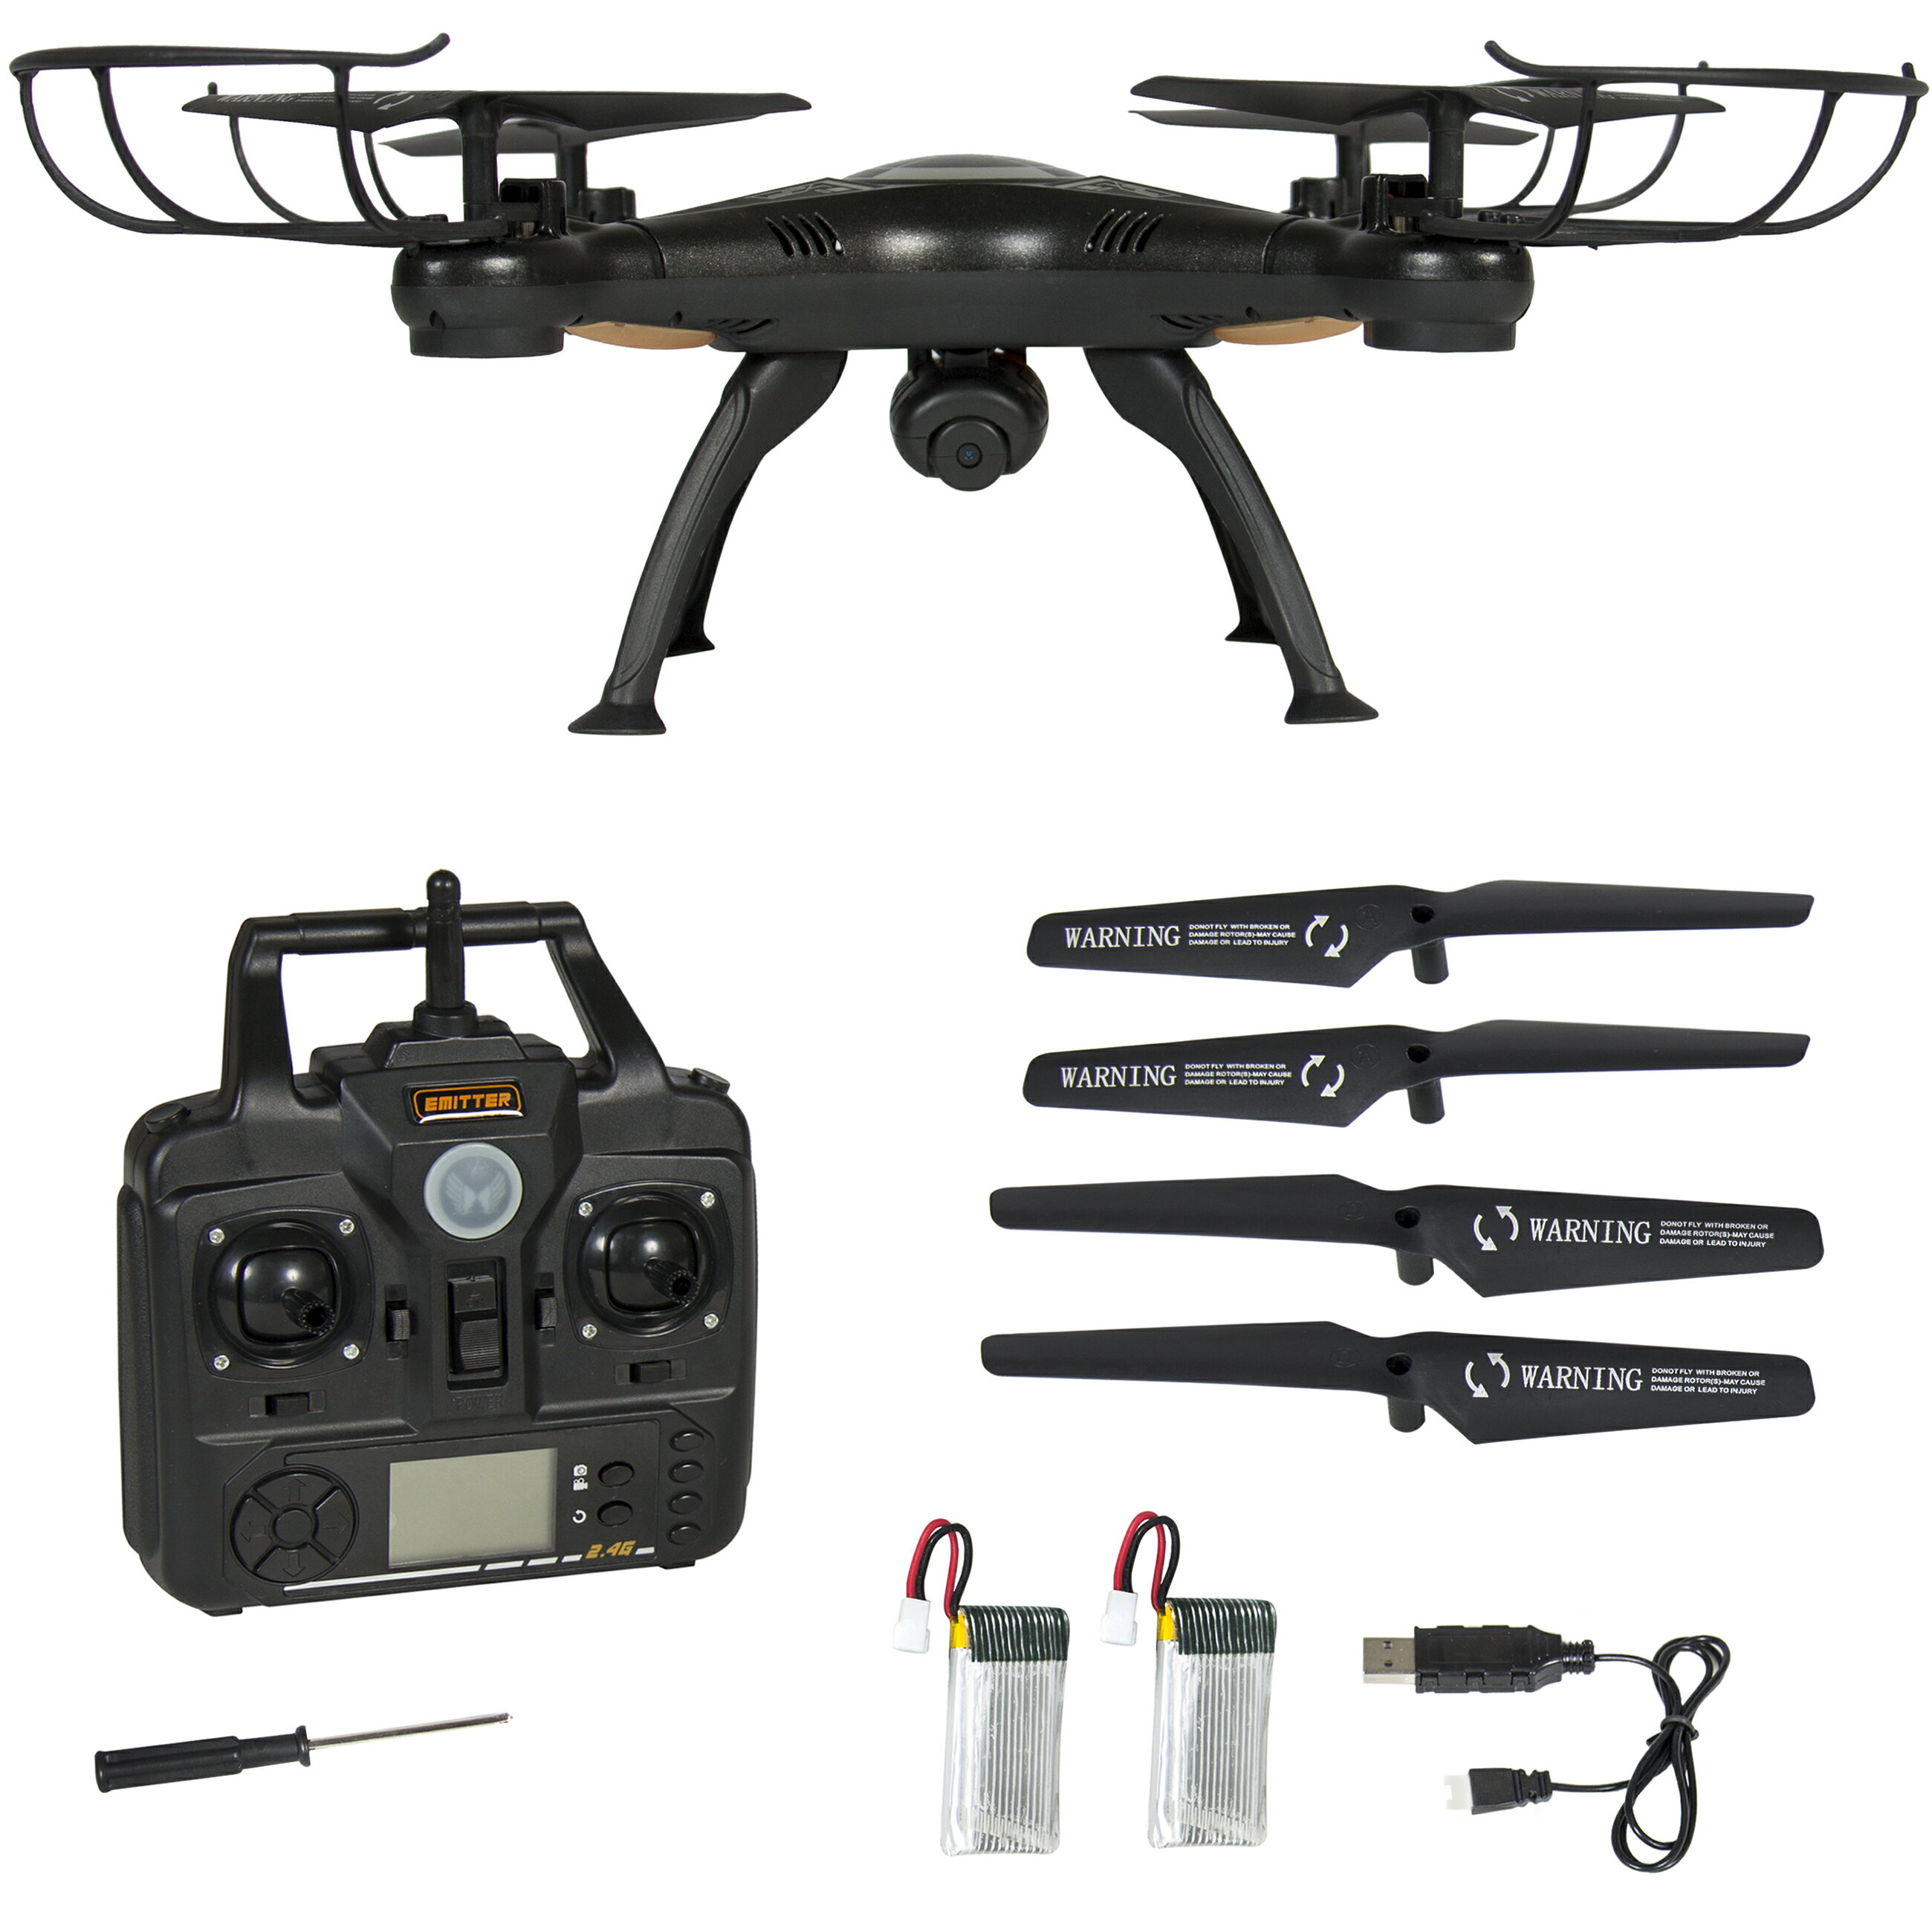 upgraded 6 axis headless rc quadcopter